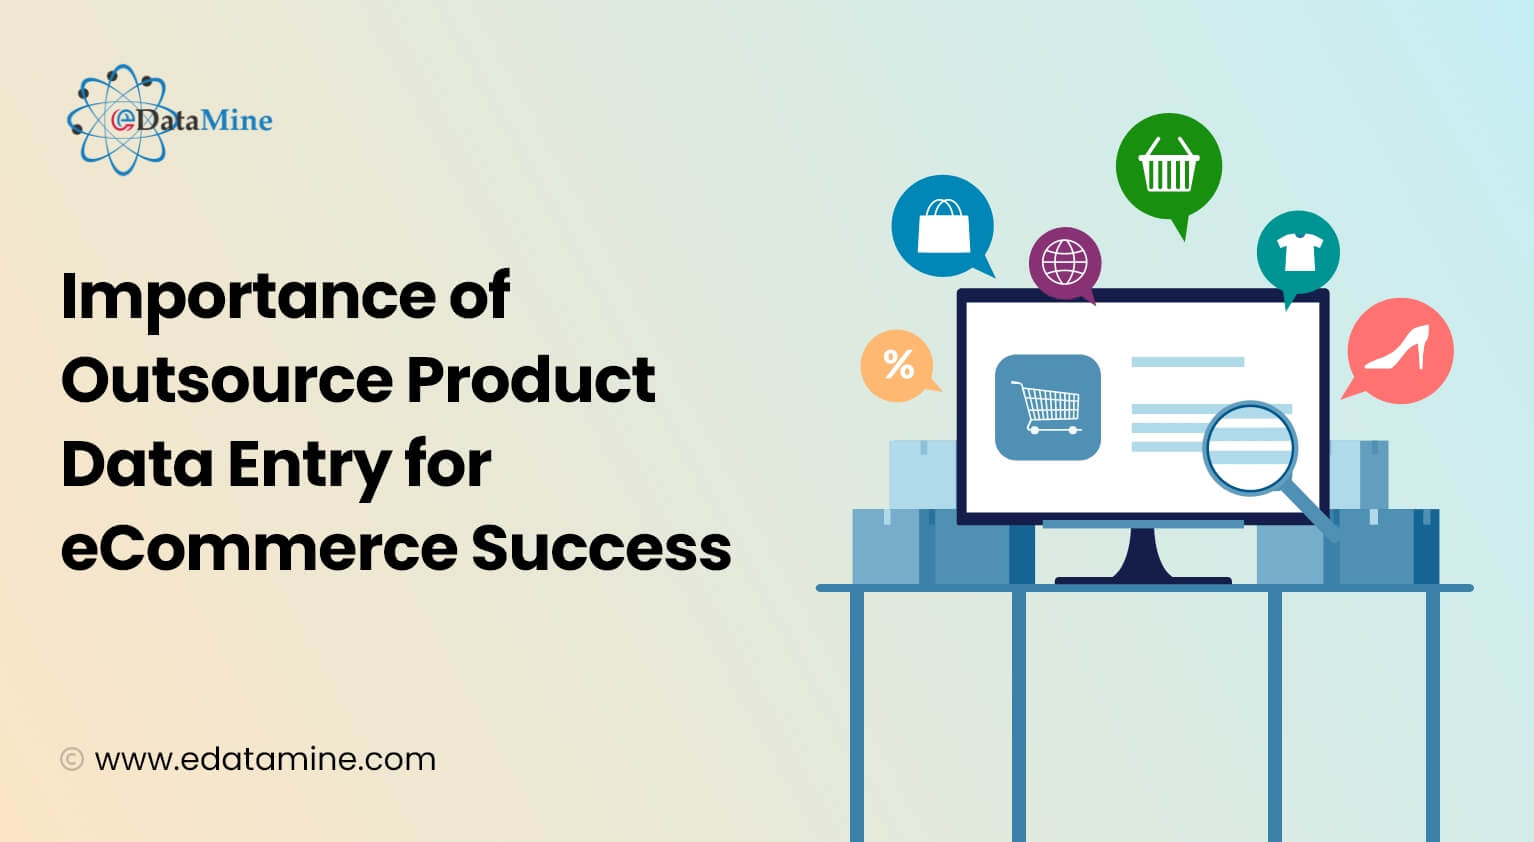 Importance of Outsource Product Data Entry for ECommerce Success